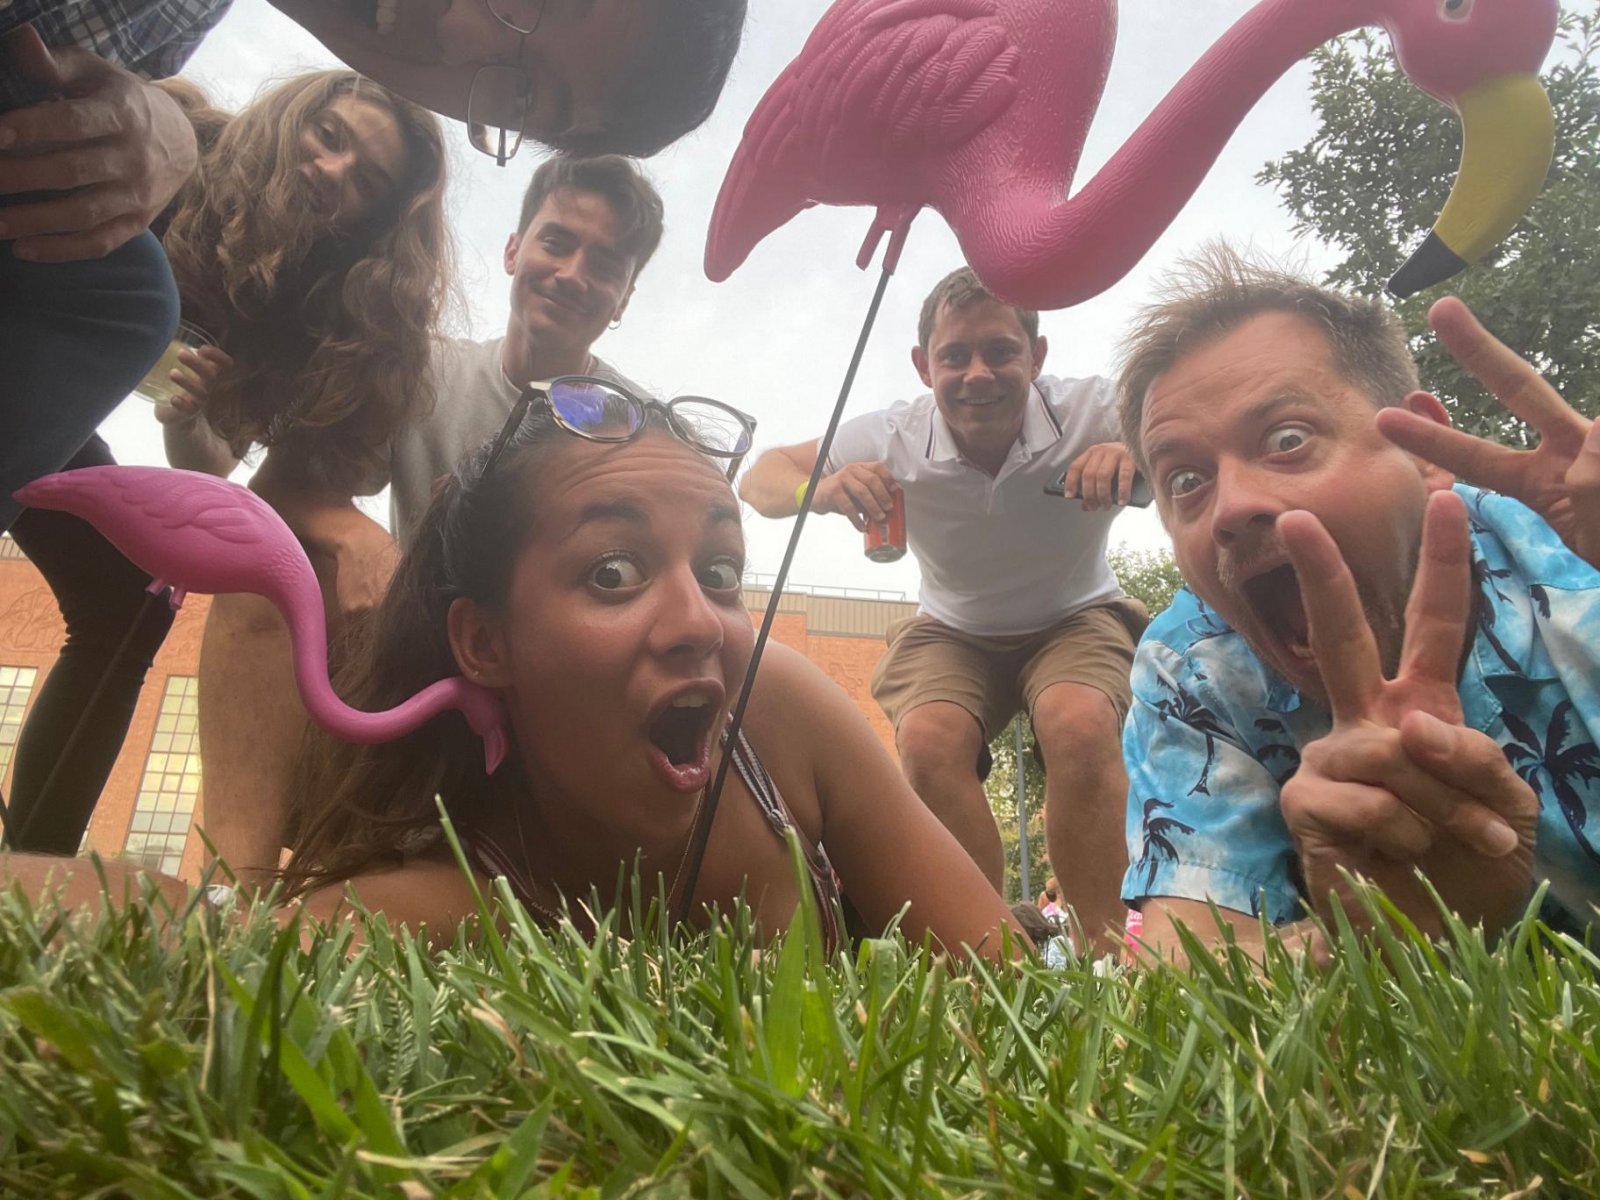 A group of people taking a selfie together outside with plastic flamingos